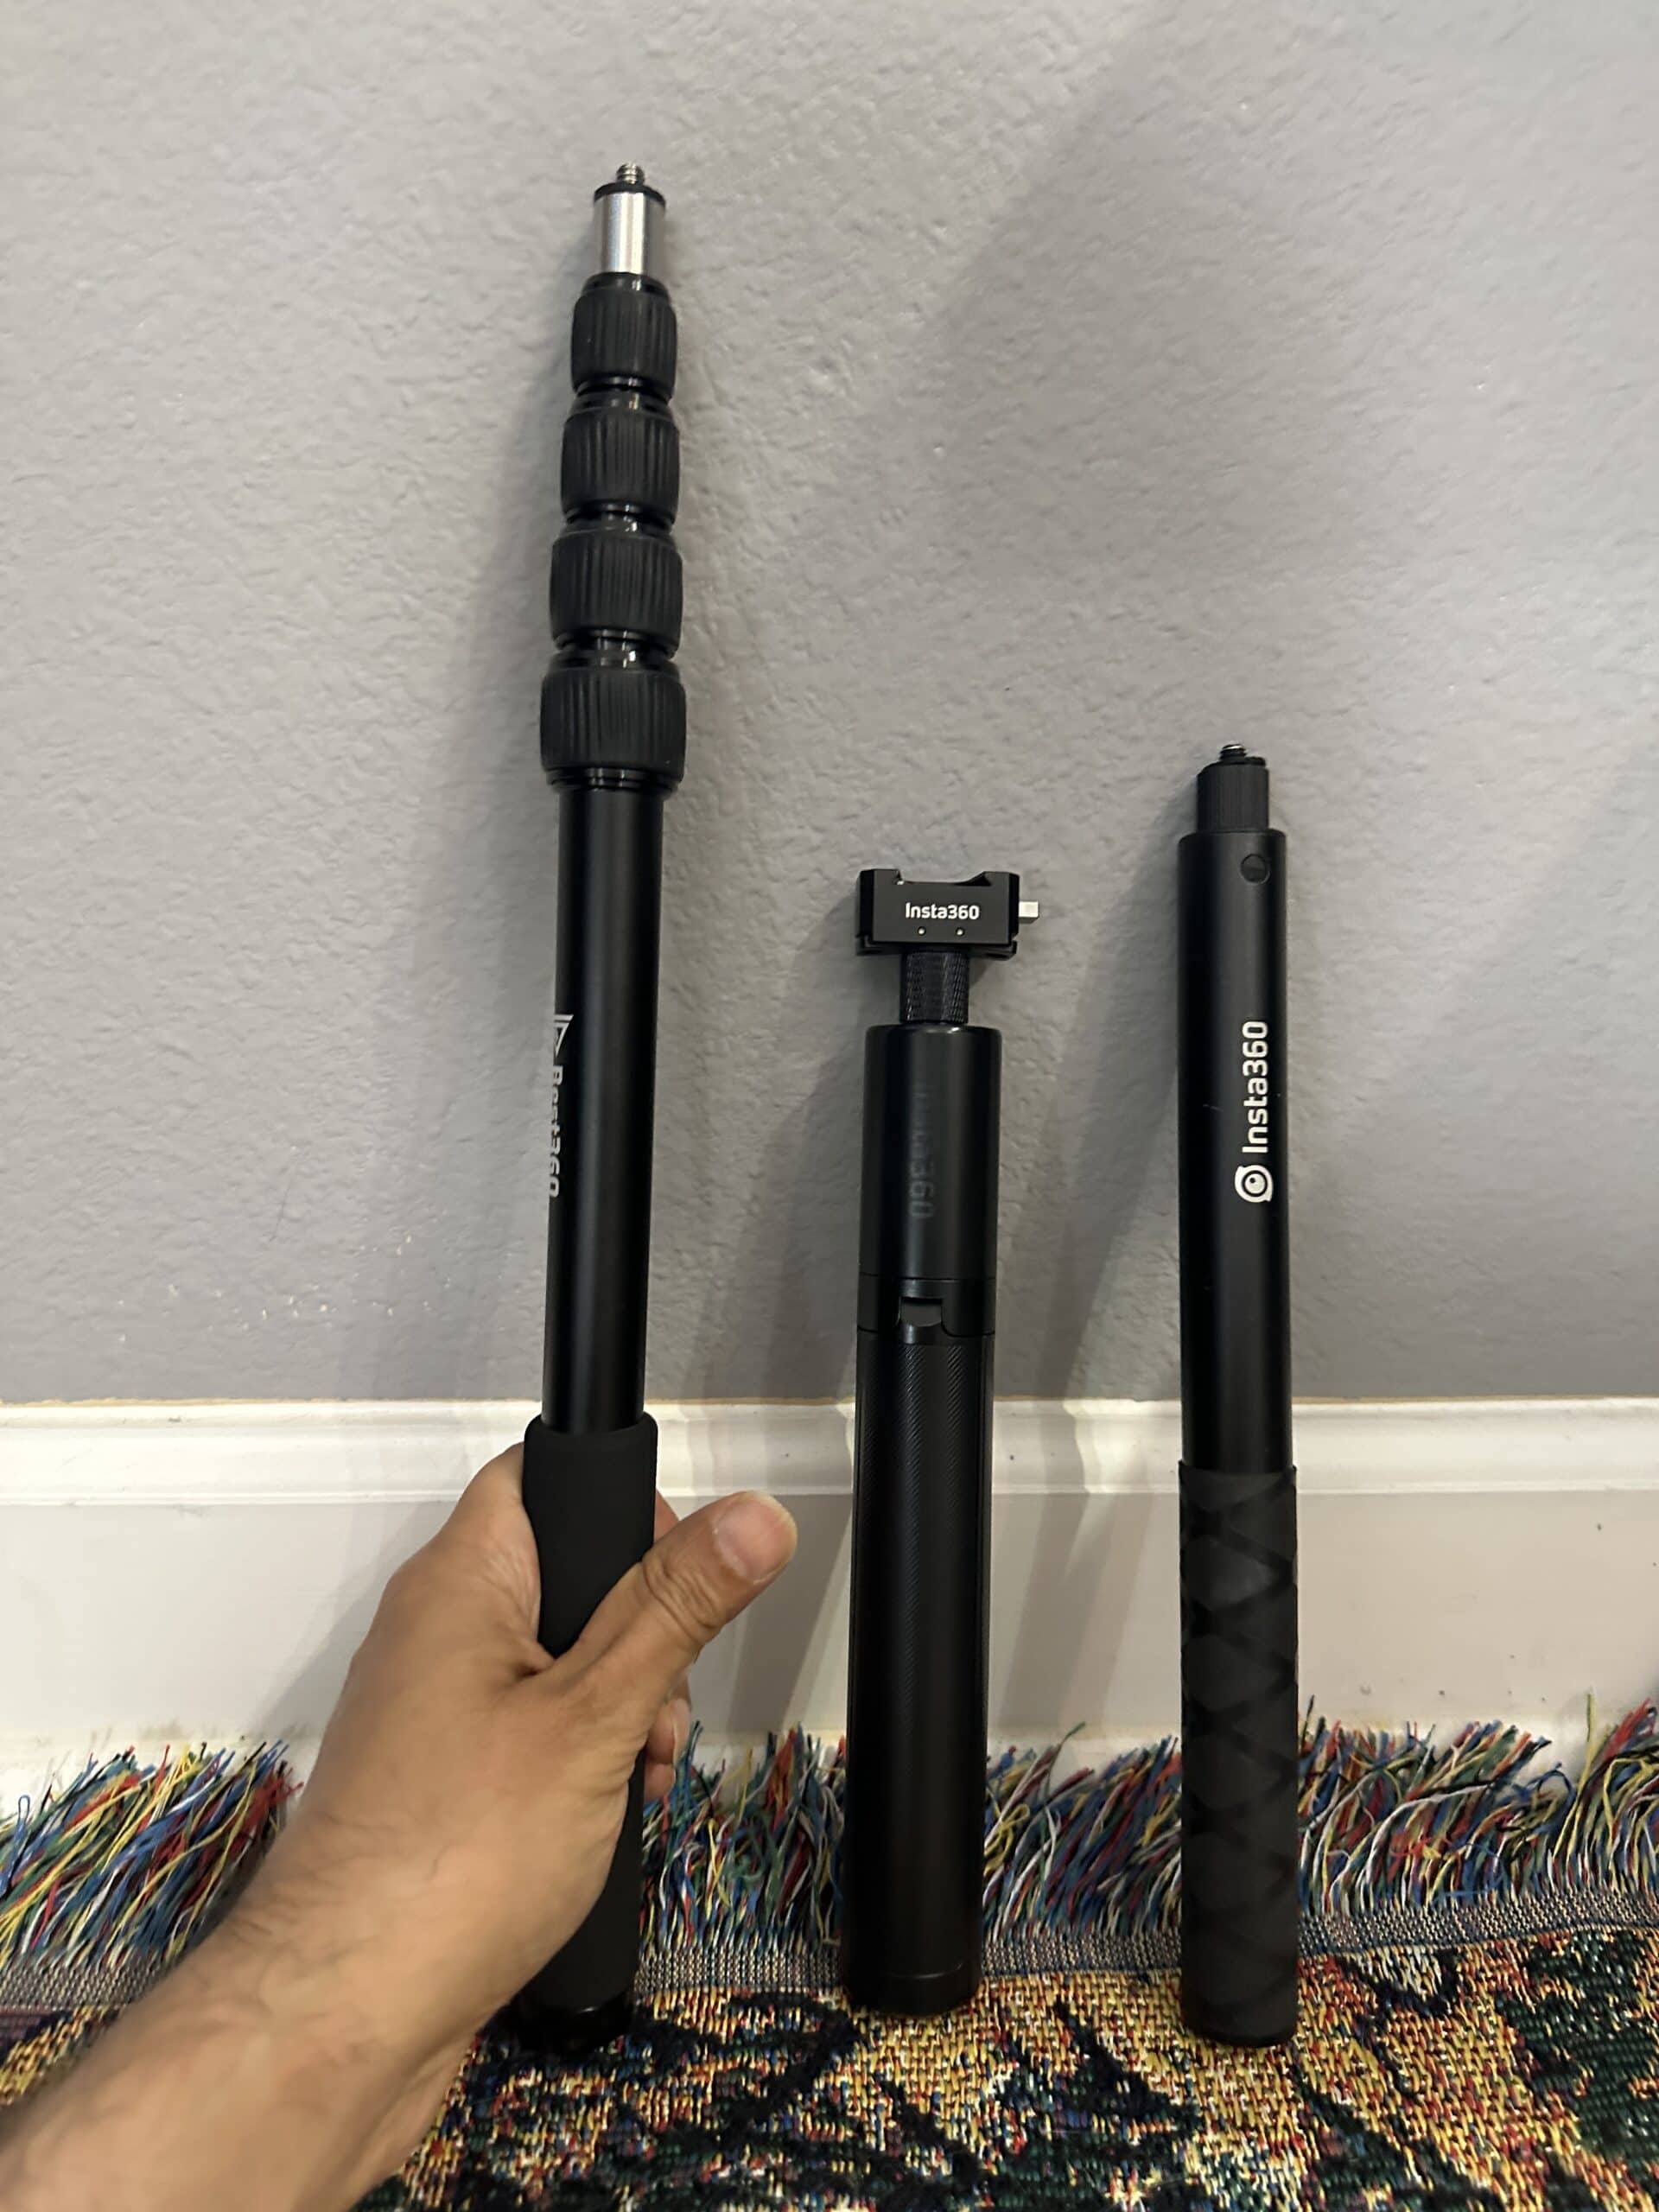 different invisible selfie sticks for your insta360 360 camera. 3 examples retracted against a wall.